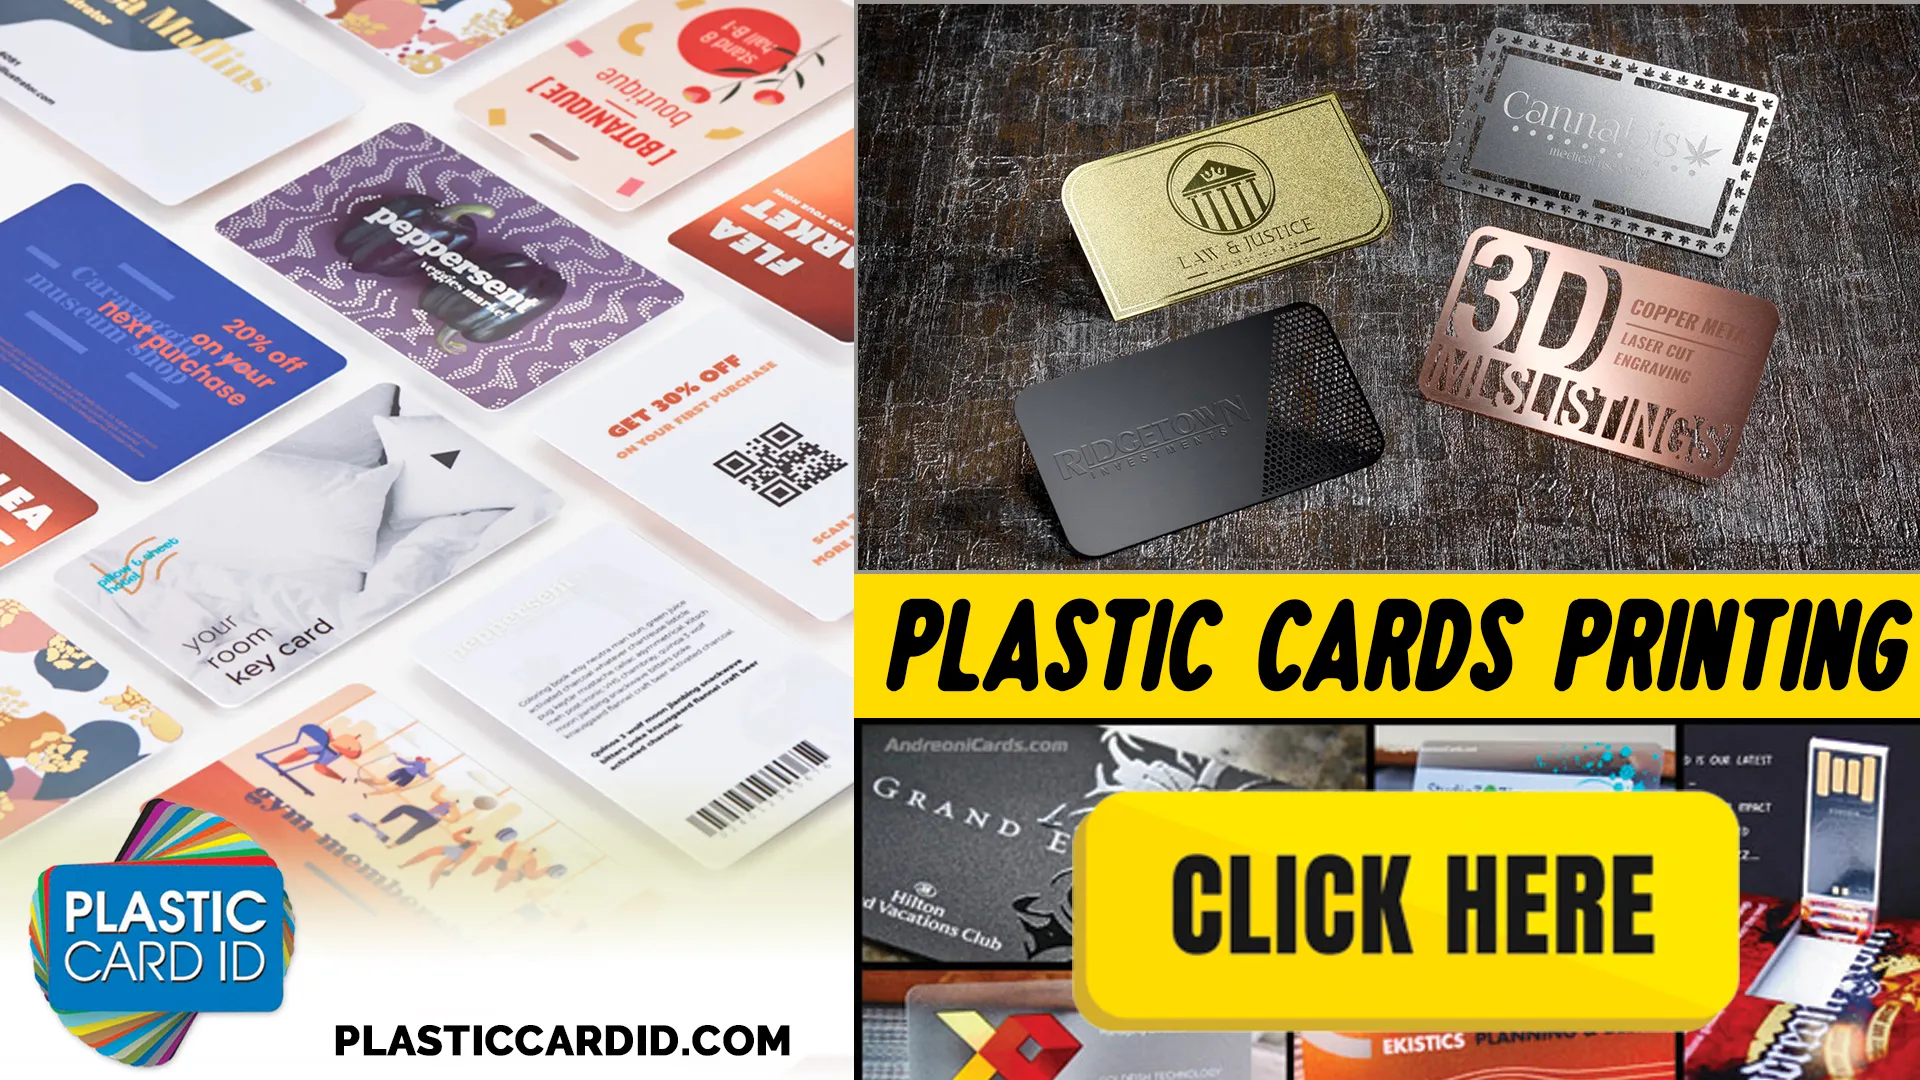 Easing Your Mind with High-Security Card Printing Services